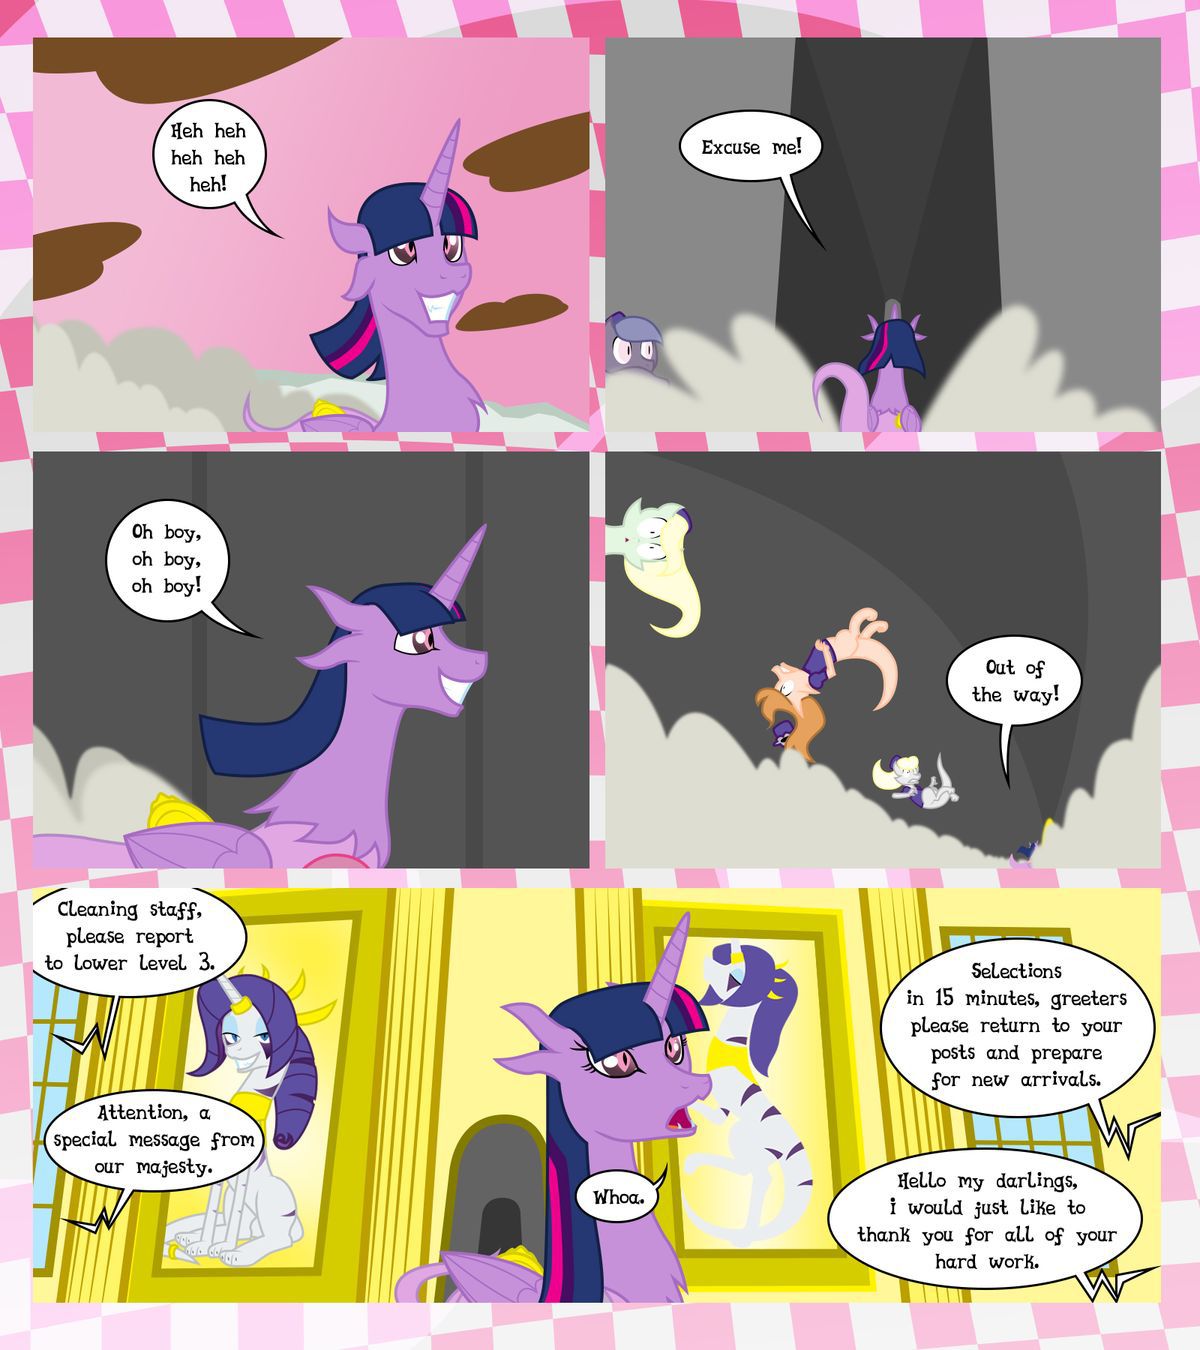 [GatesMcCloud] Cutie Mark Crusaders 10k: Chapter 3 - The Lost (My Little Pony: Friendship is Magic) [English] [Ongoing] 49